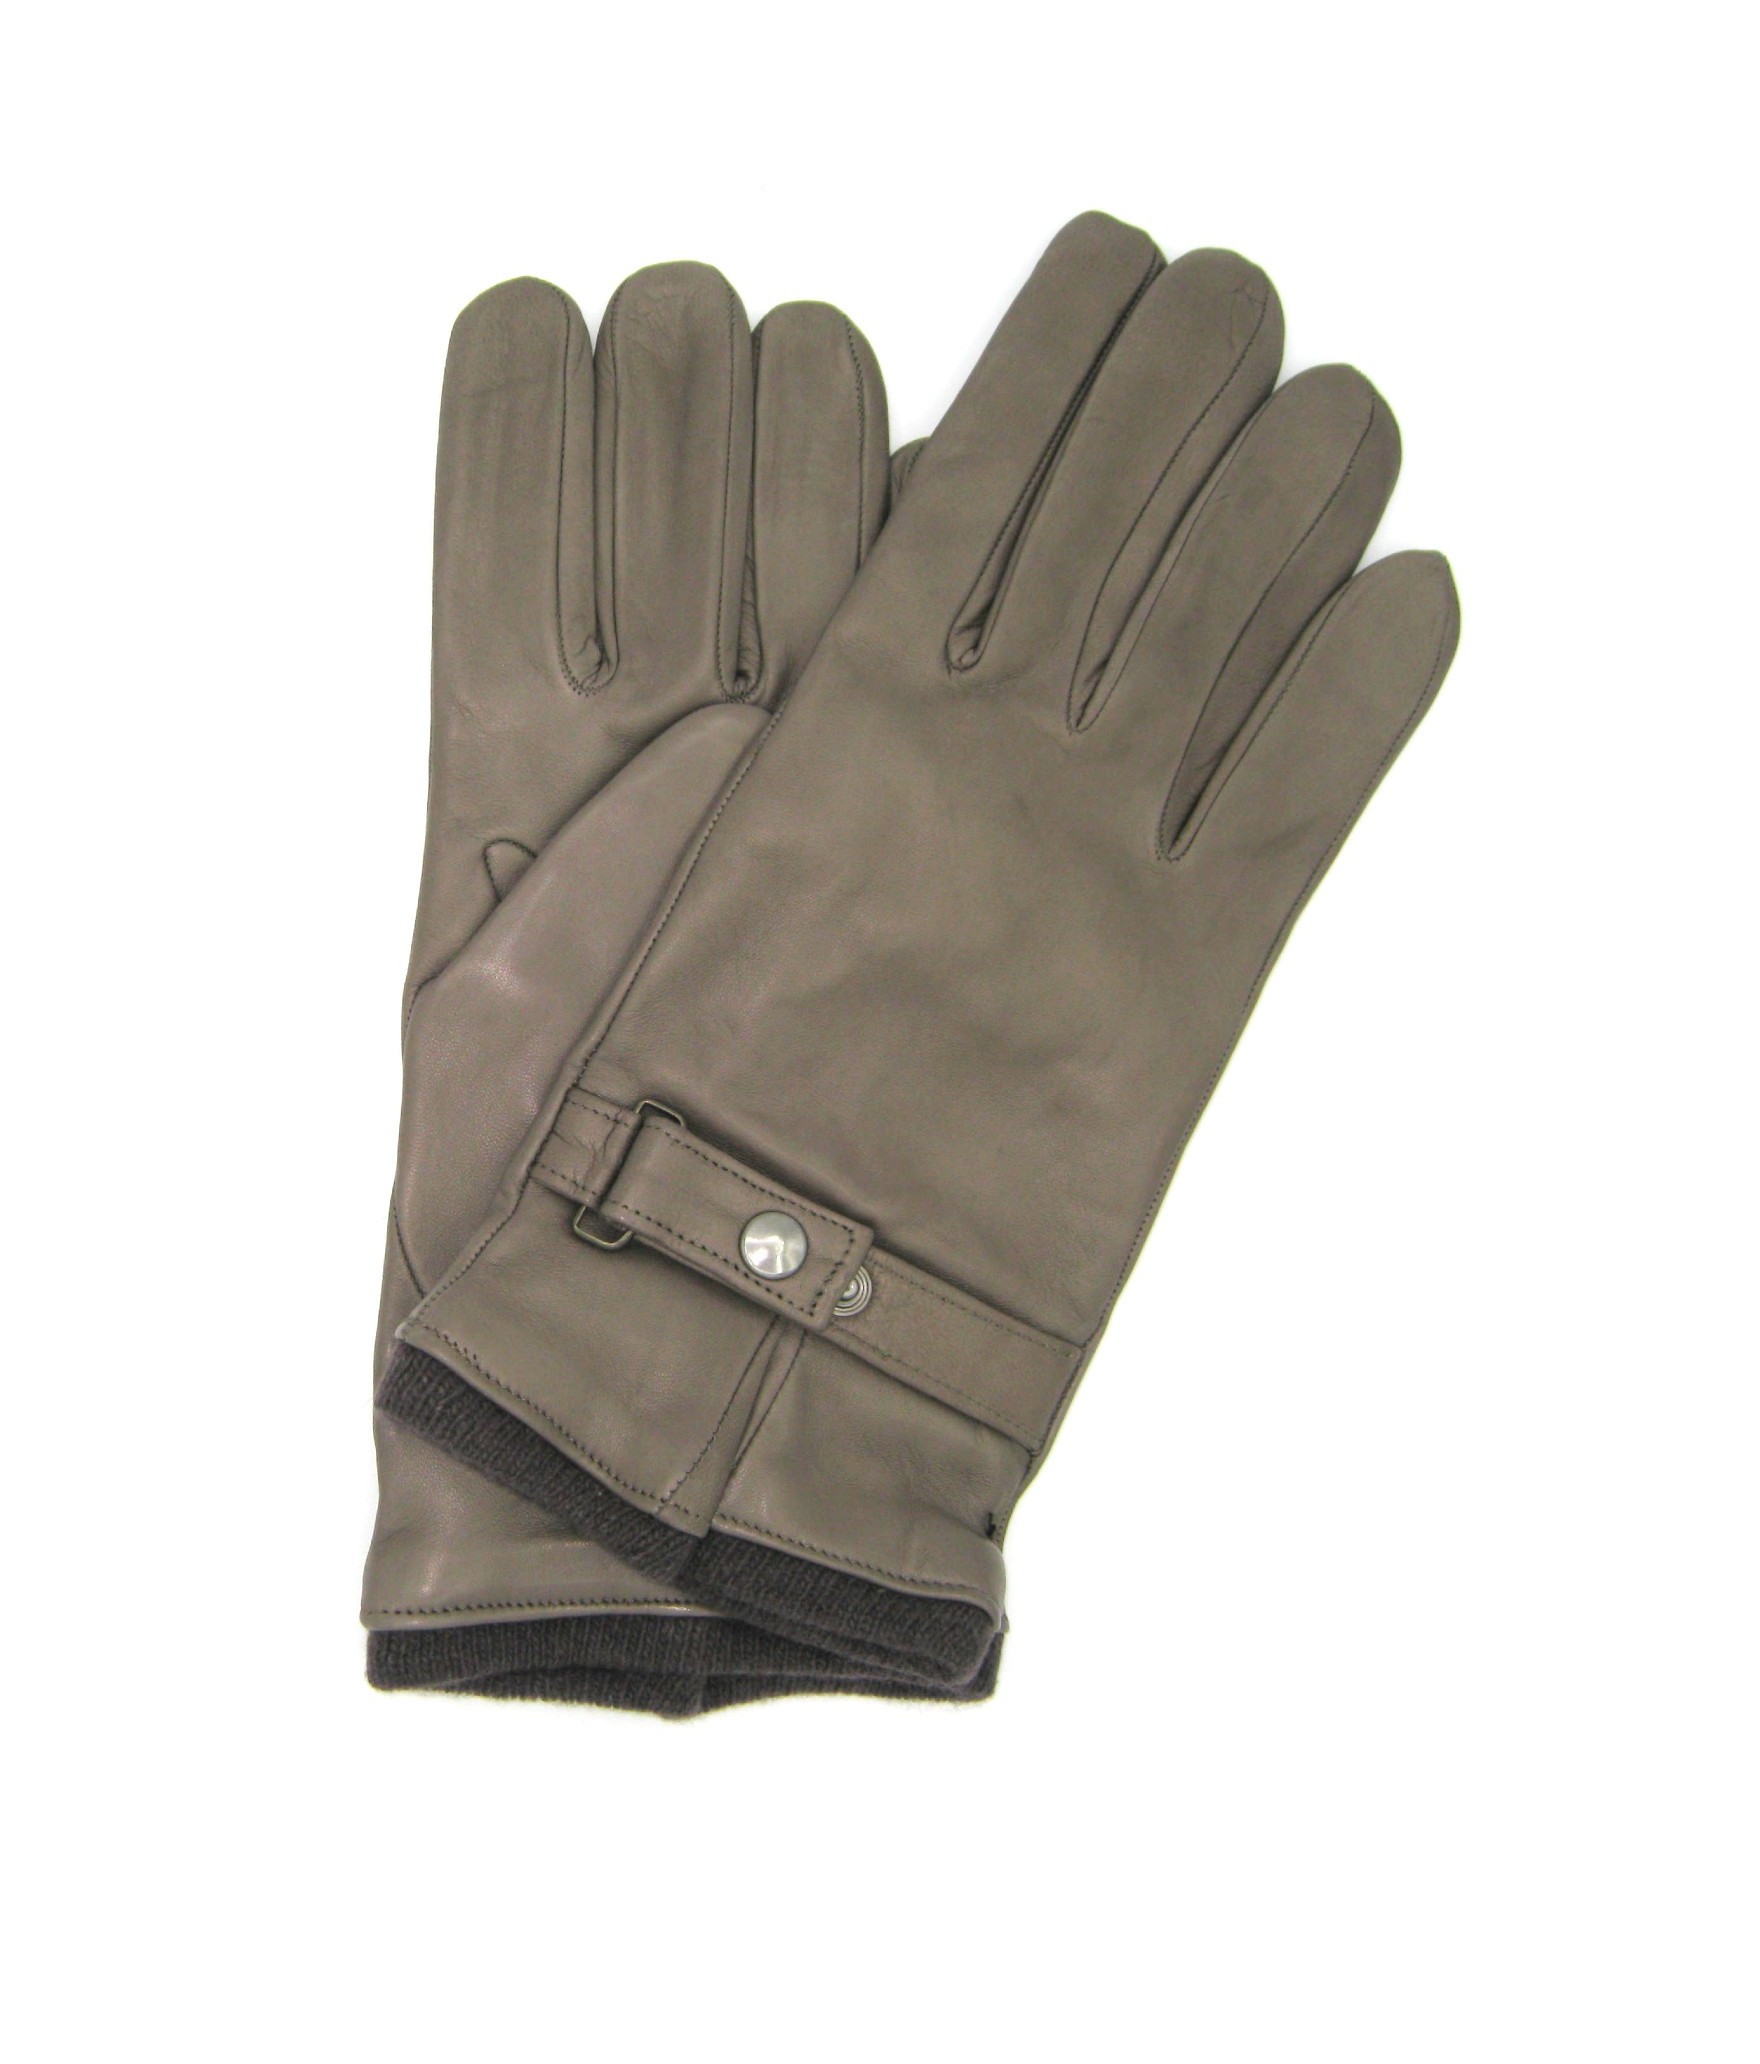 Uomo Fashion Nappa leather gloves cashmere lined with strap Mud